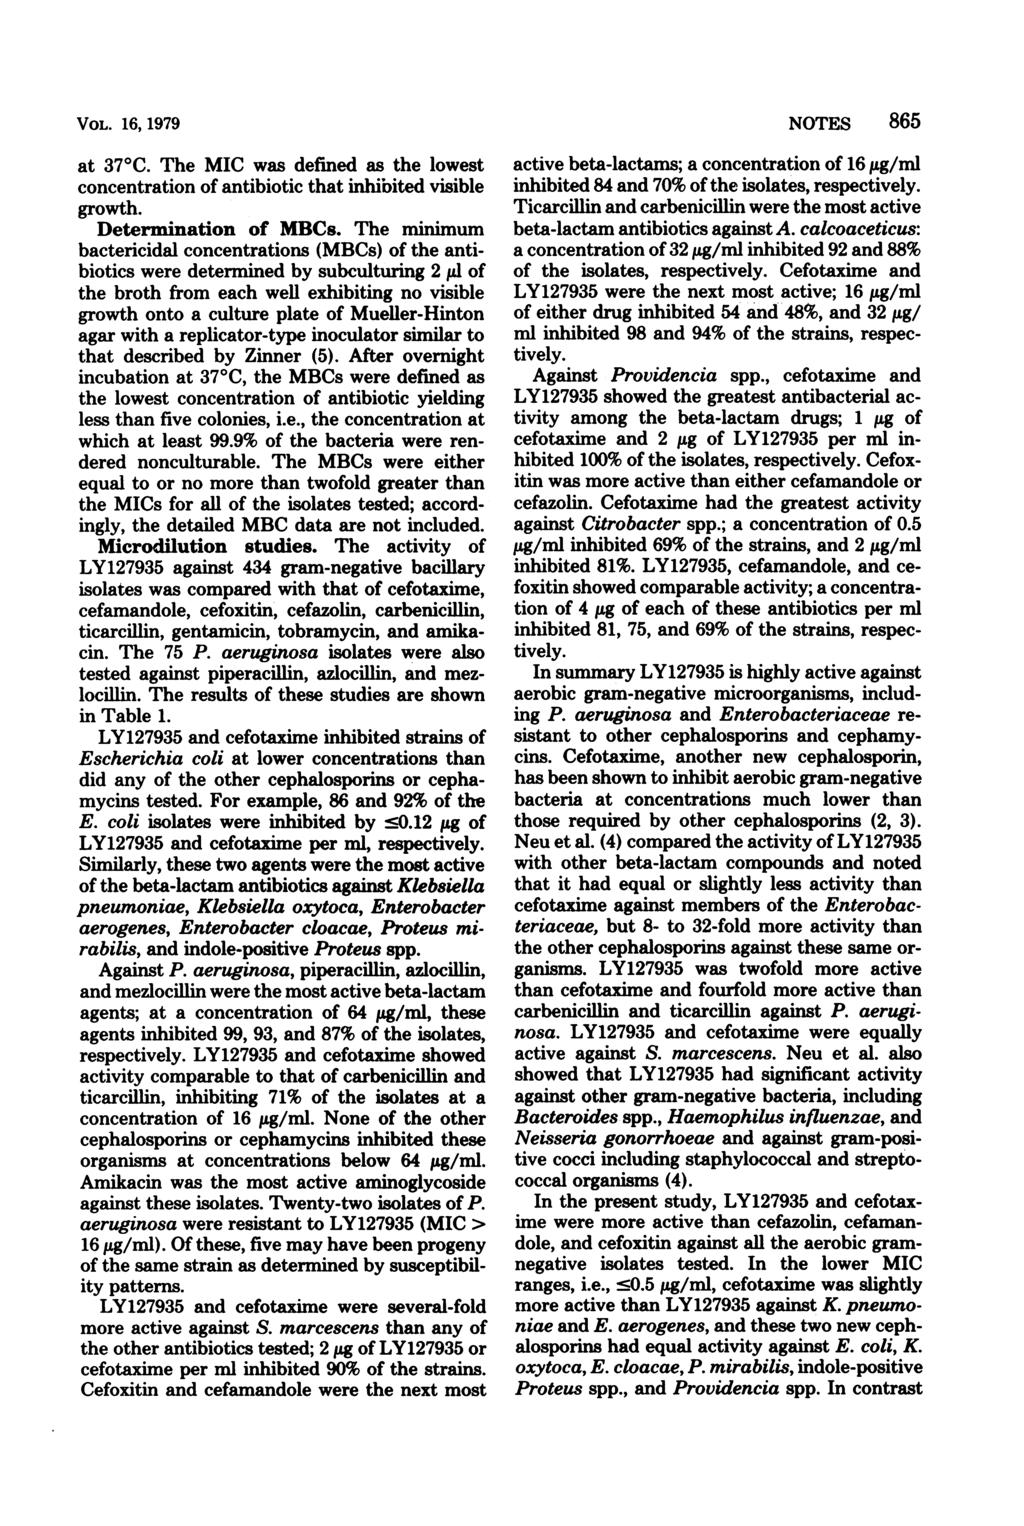 VOL., 1979 at 370C. The MIC was defined as the lowest concentration of antibiotic that inhibited visible growth. Determination of MBCs.